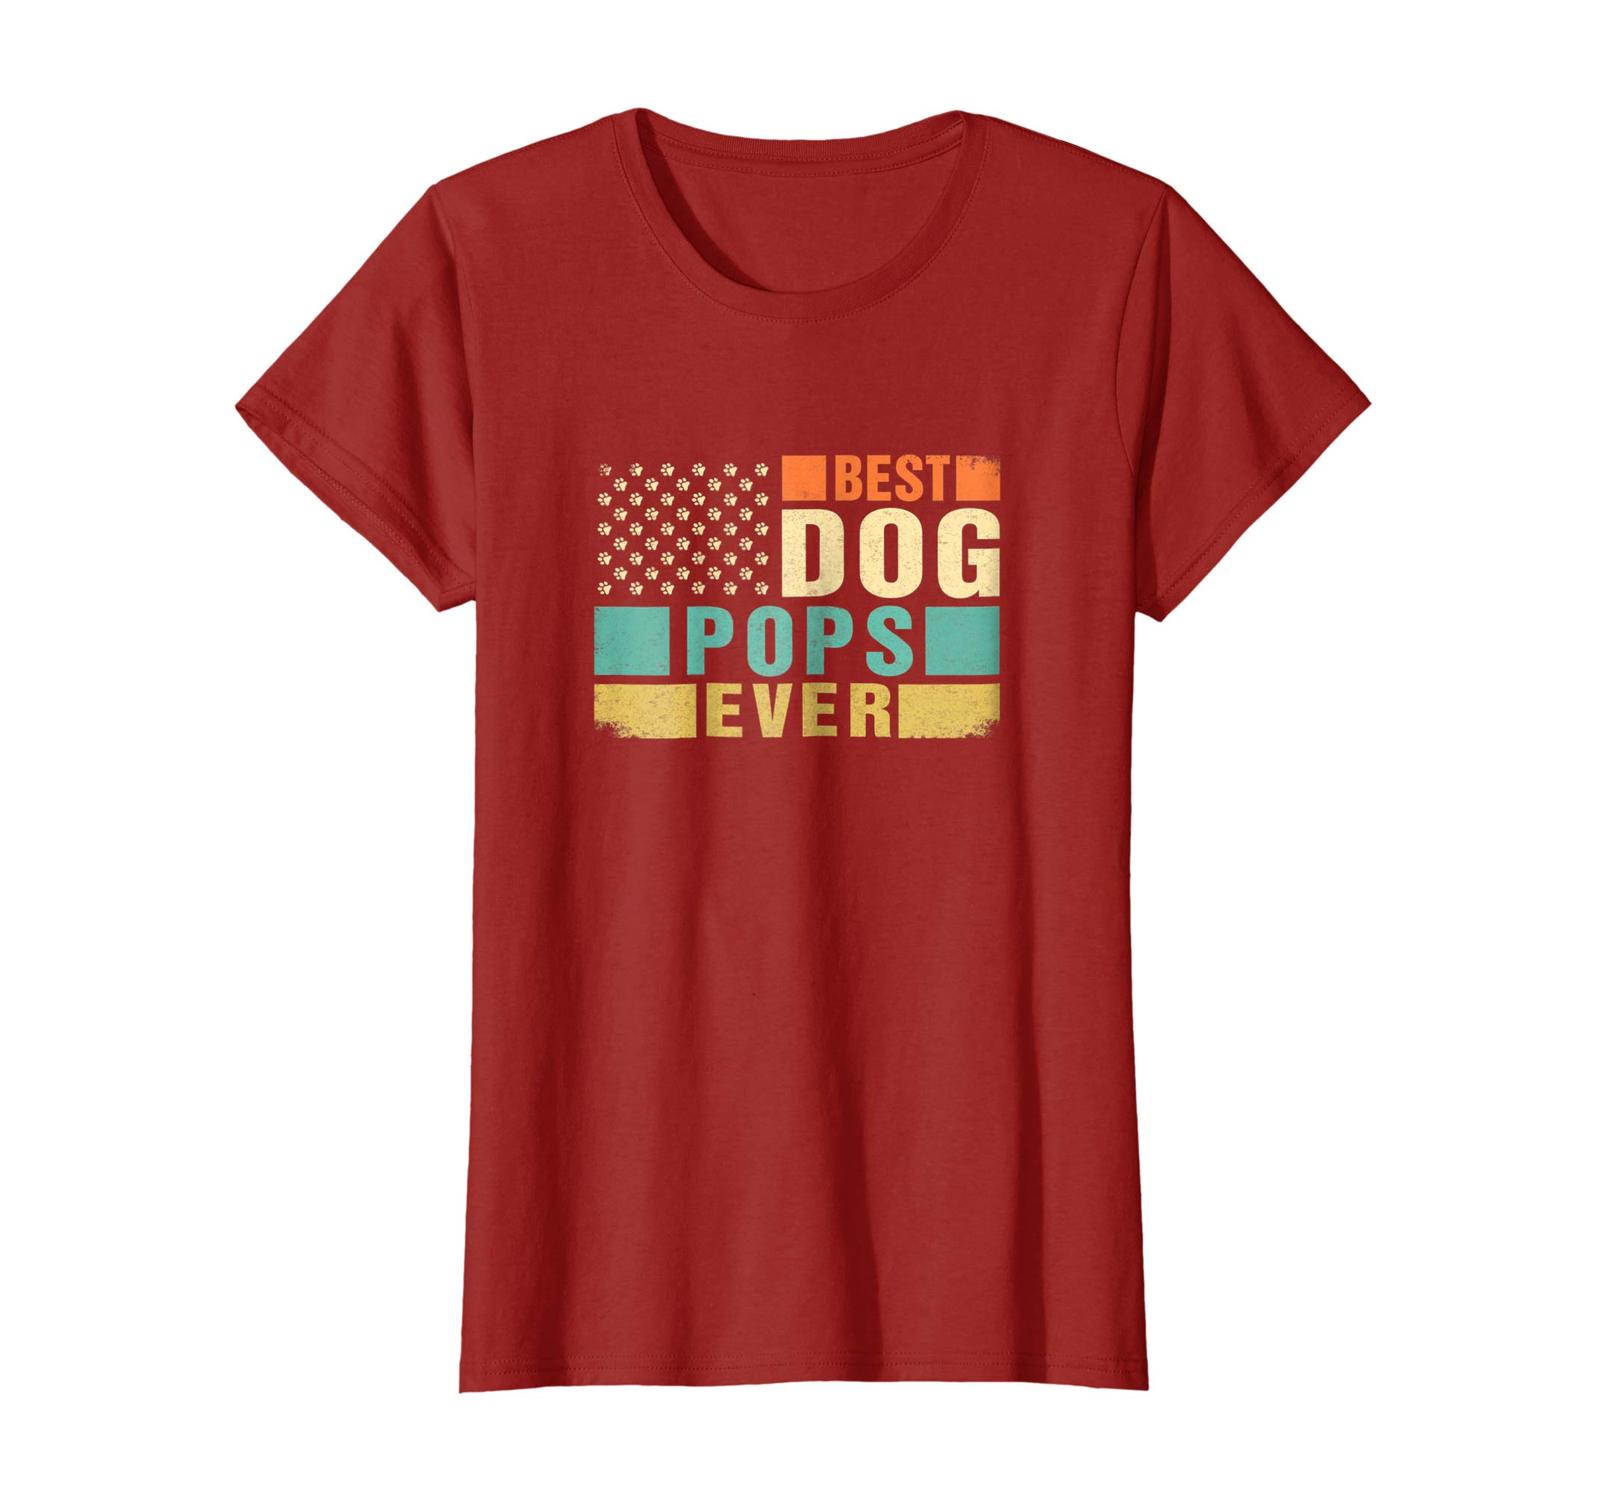 Dog Fashion - Vintage Retro BEST DOG POPS EVER American Flag Fathers Day Wowen